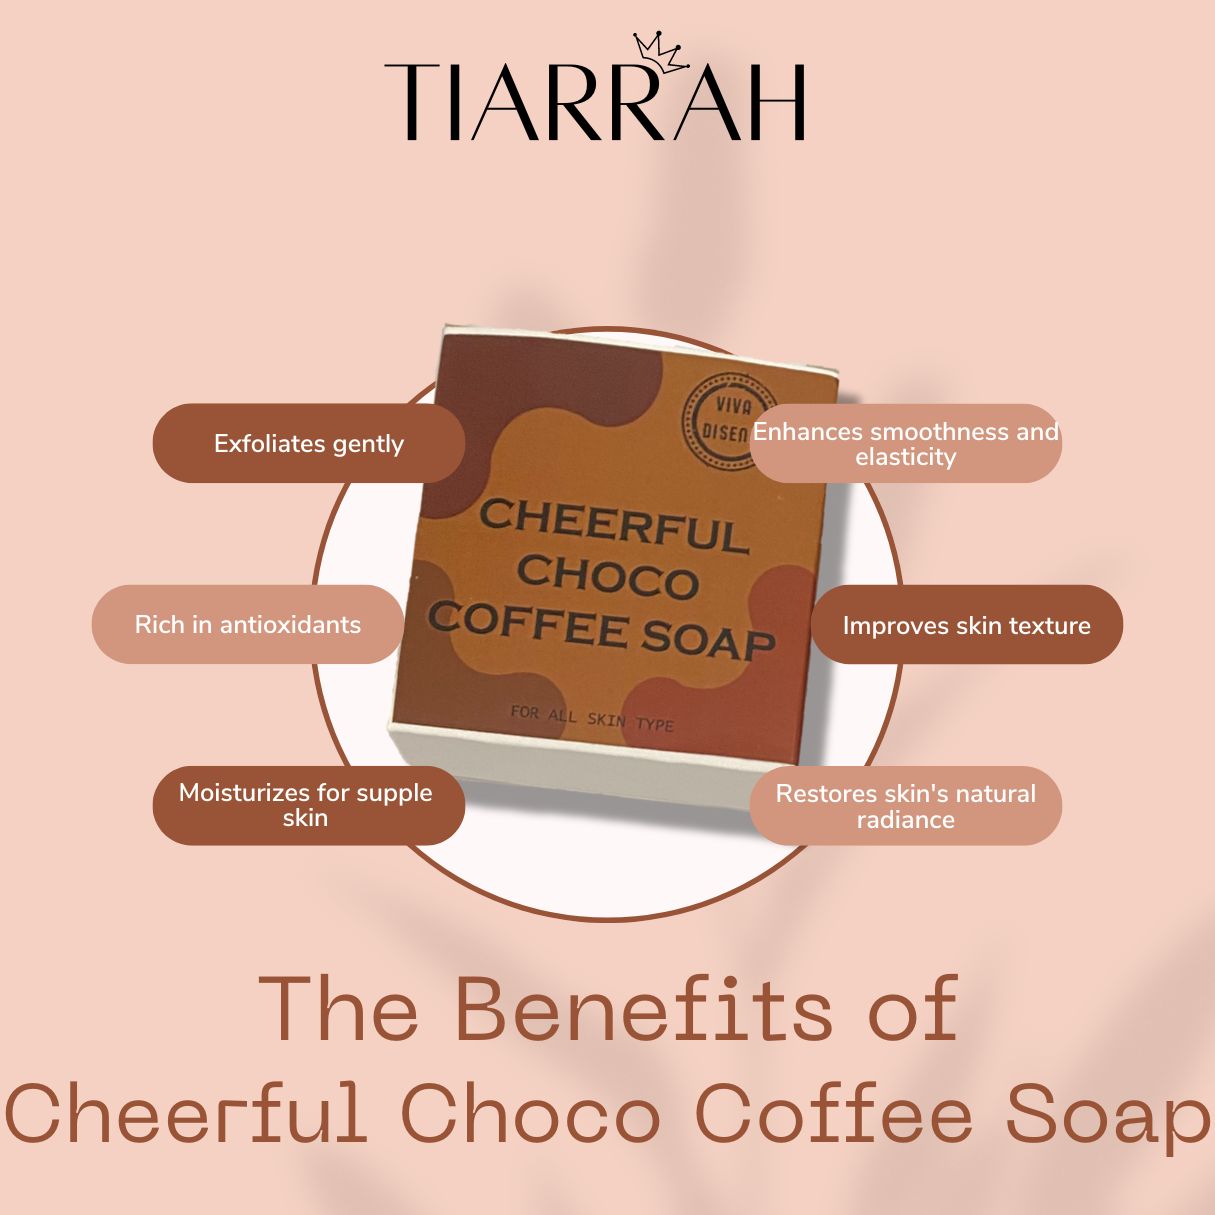 Tiarrah's Choco Coffee Soap: Pure, Safe, Energizing - The Luxury Bath and Body Care Shop